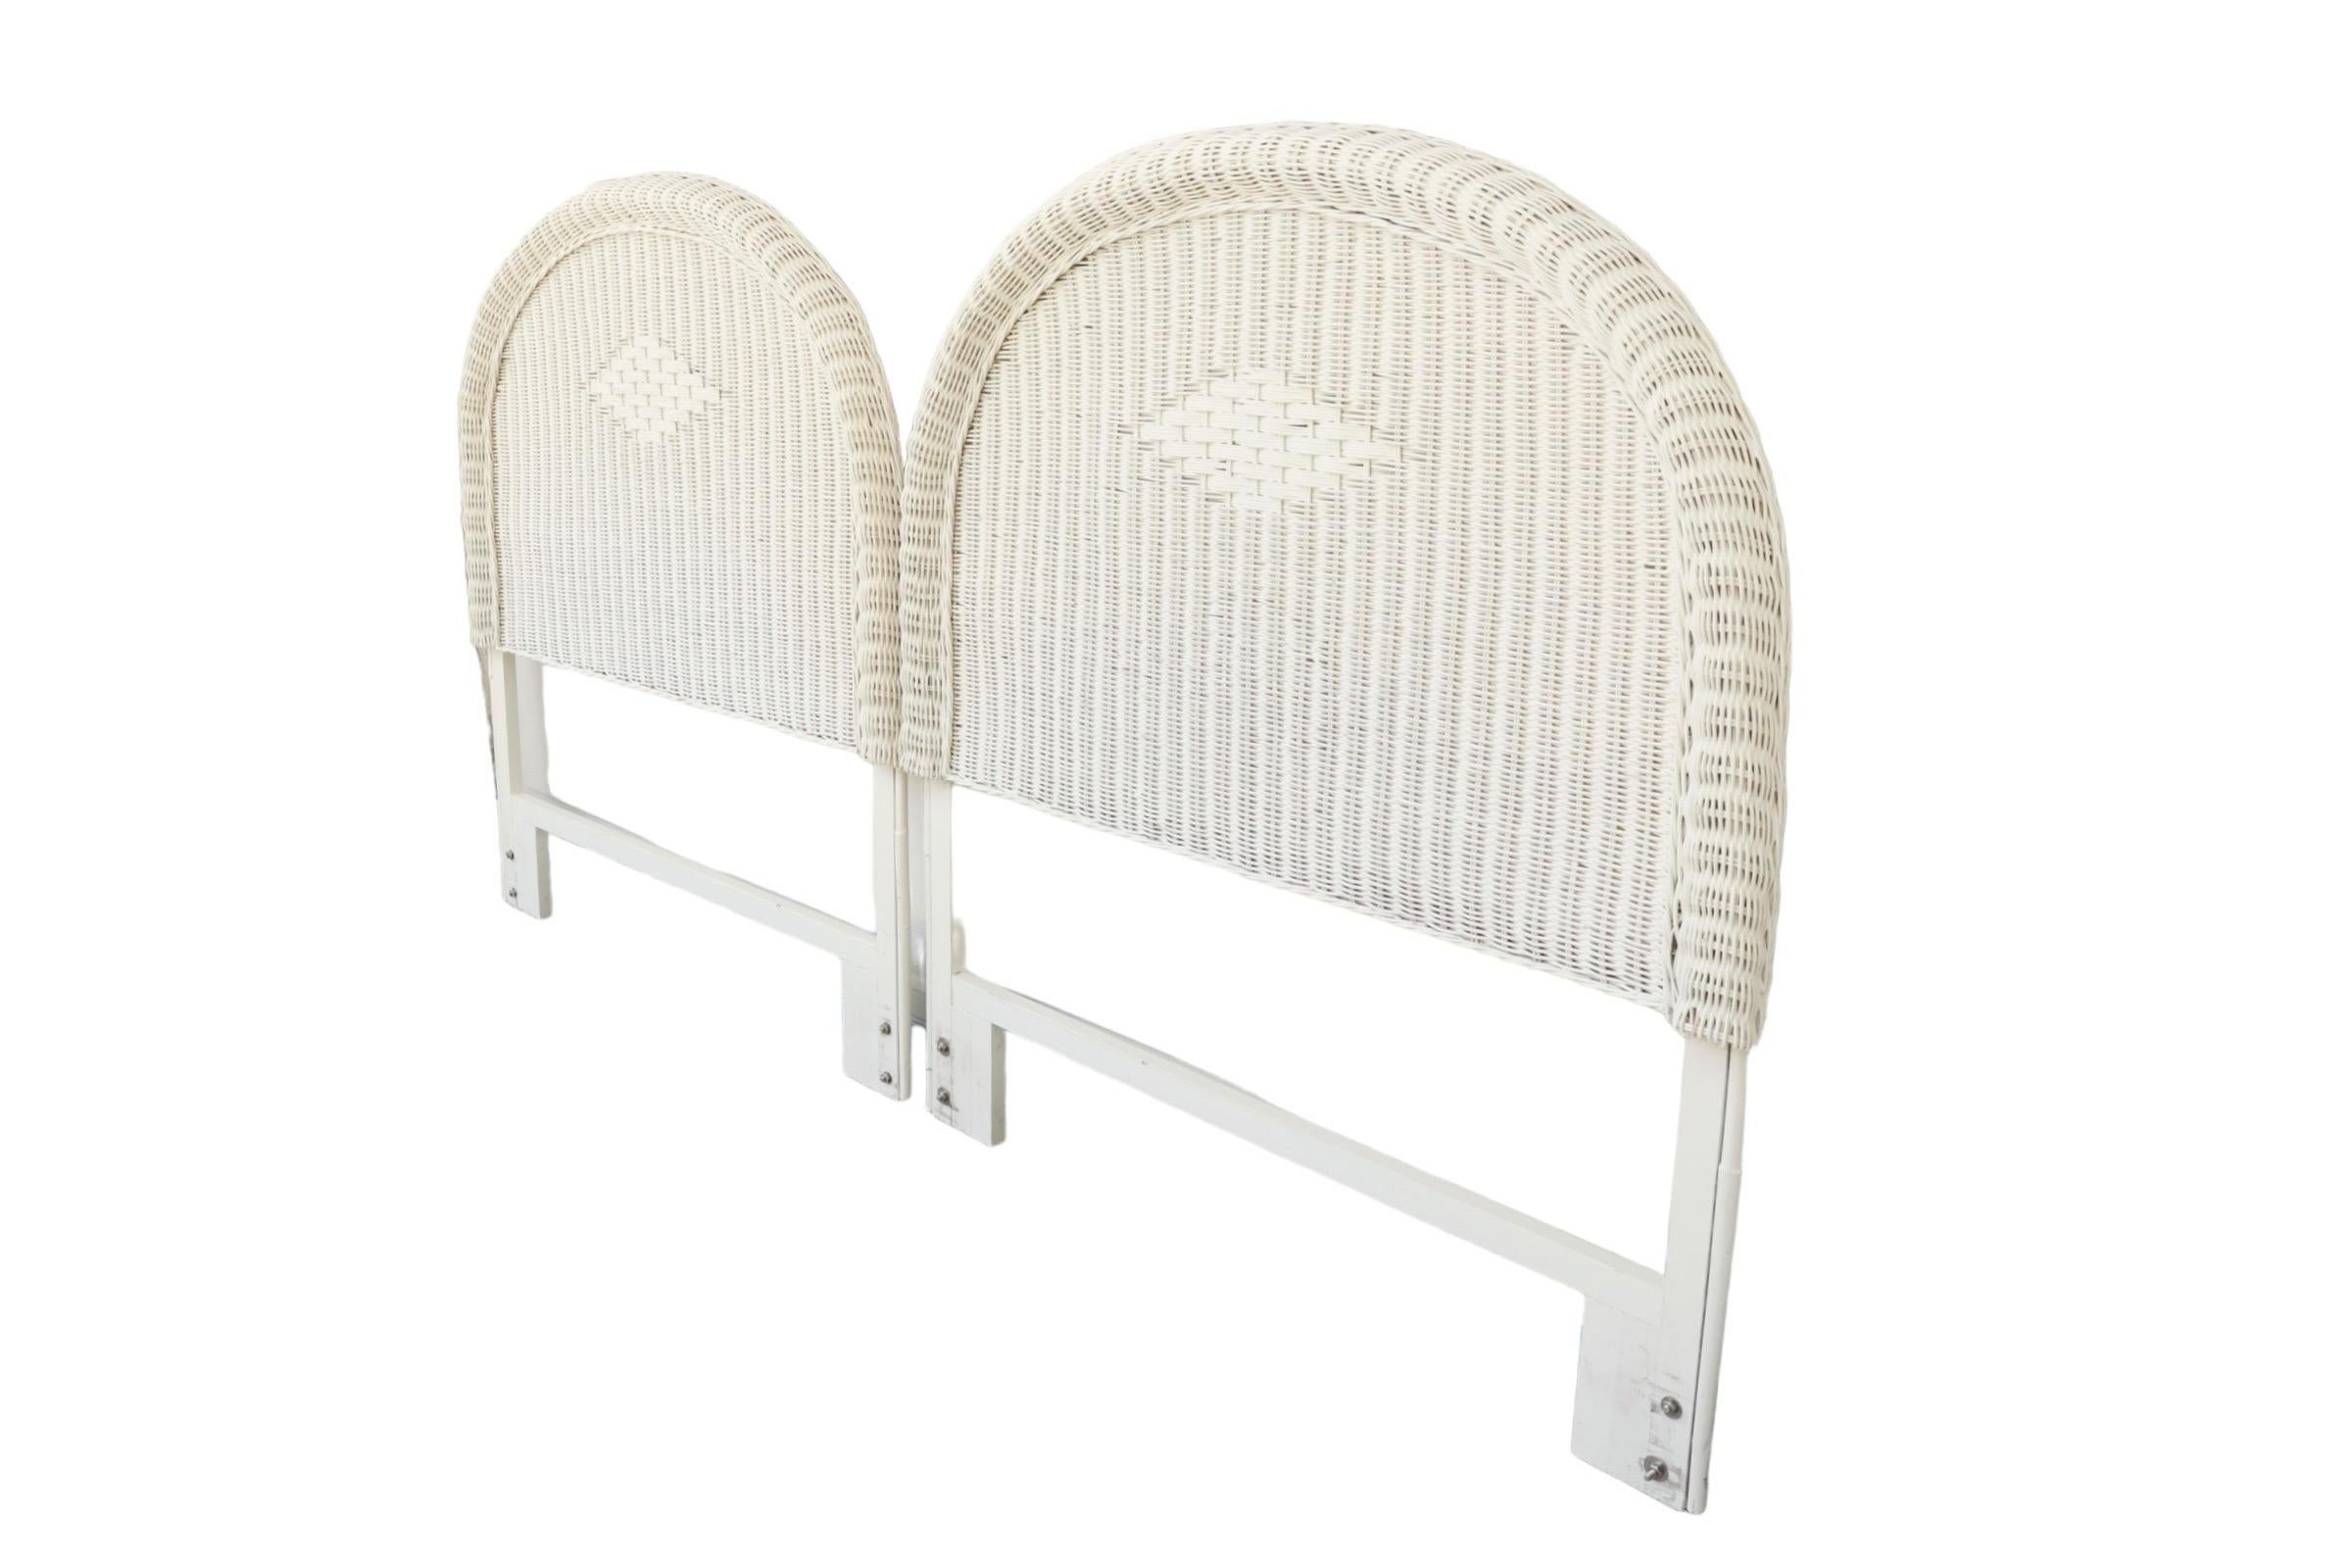 A pair of Heywood Wakefield style twin size rattan headboards. Bentwood frames support woven rattan in a gentle arched shape. Decorated in the center with a traditional Heywood Wakefield style diamond and finished with a rope-twist trim. Painted